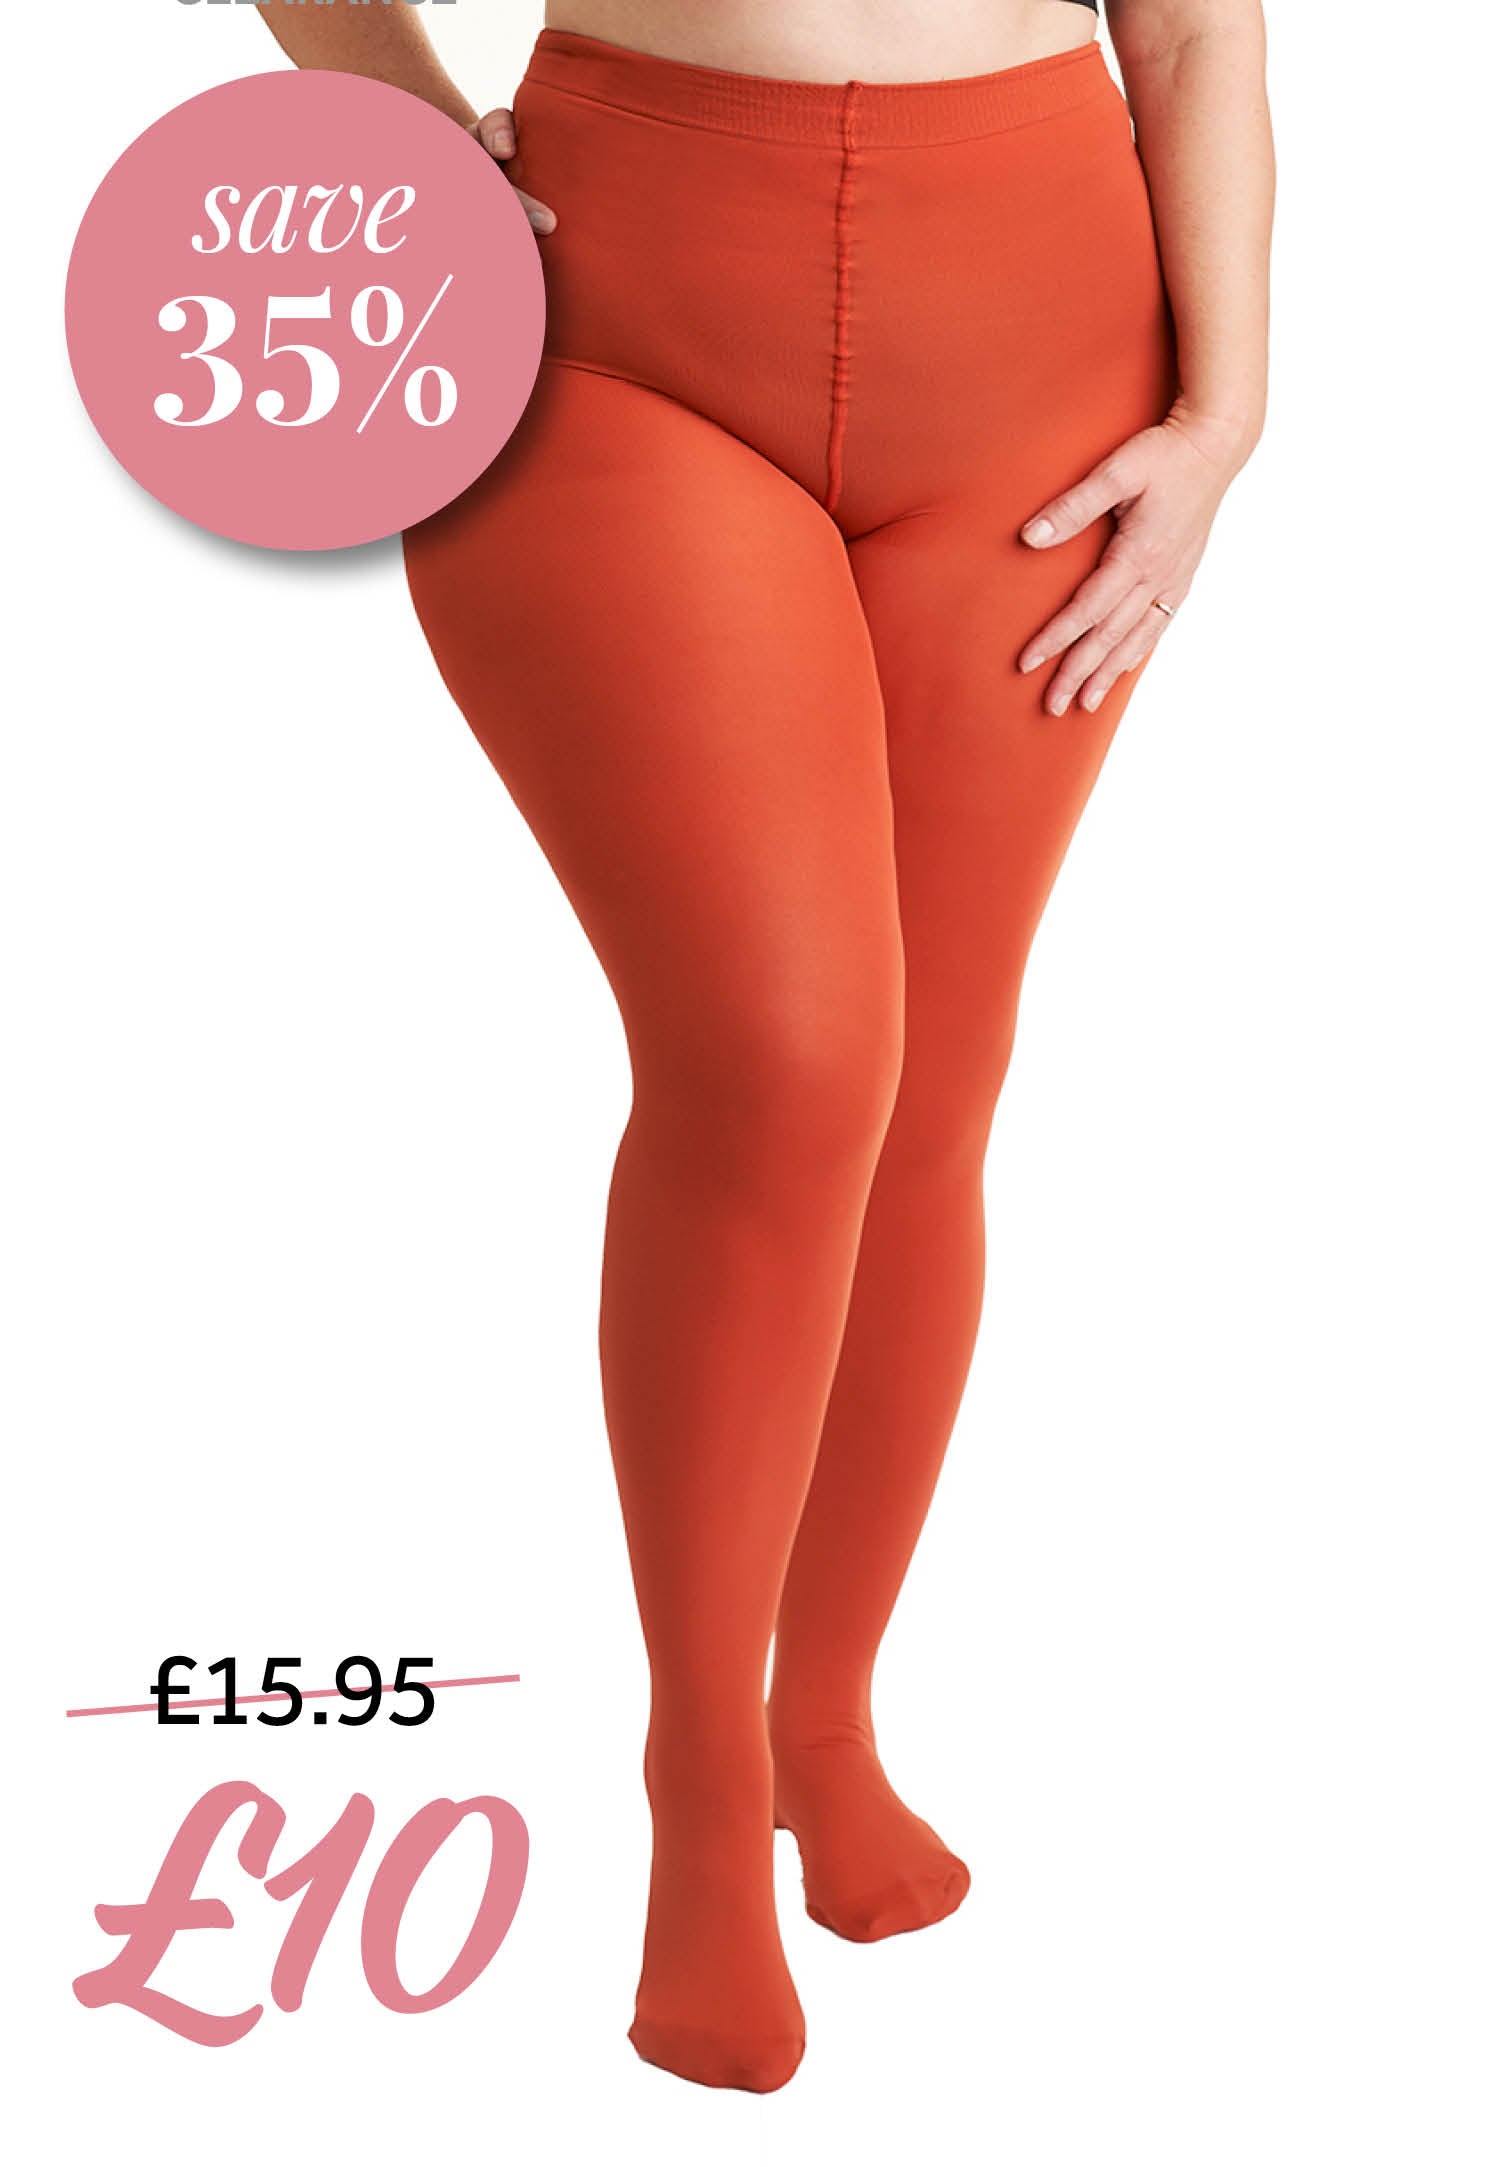 Plus Size Clearance Sale  The Big Bloomers Company